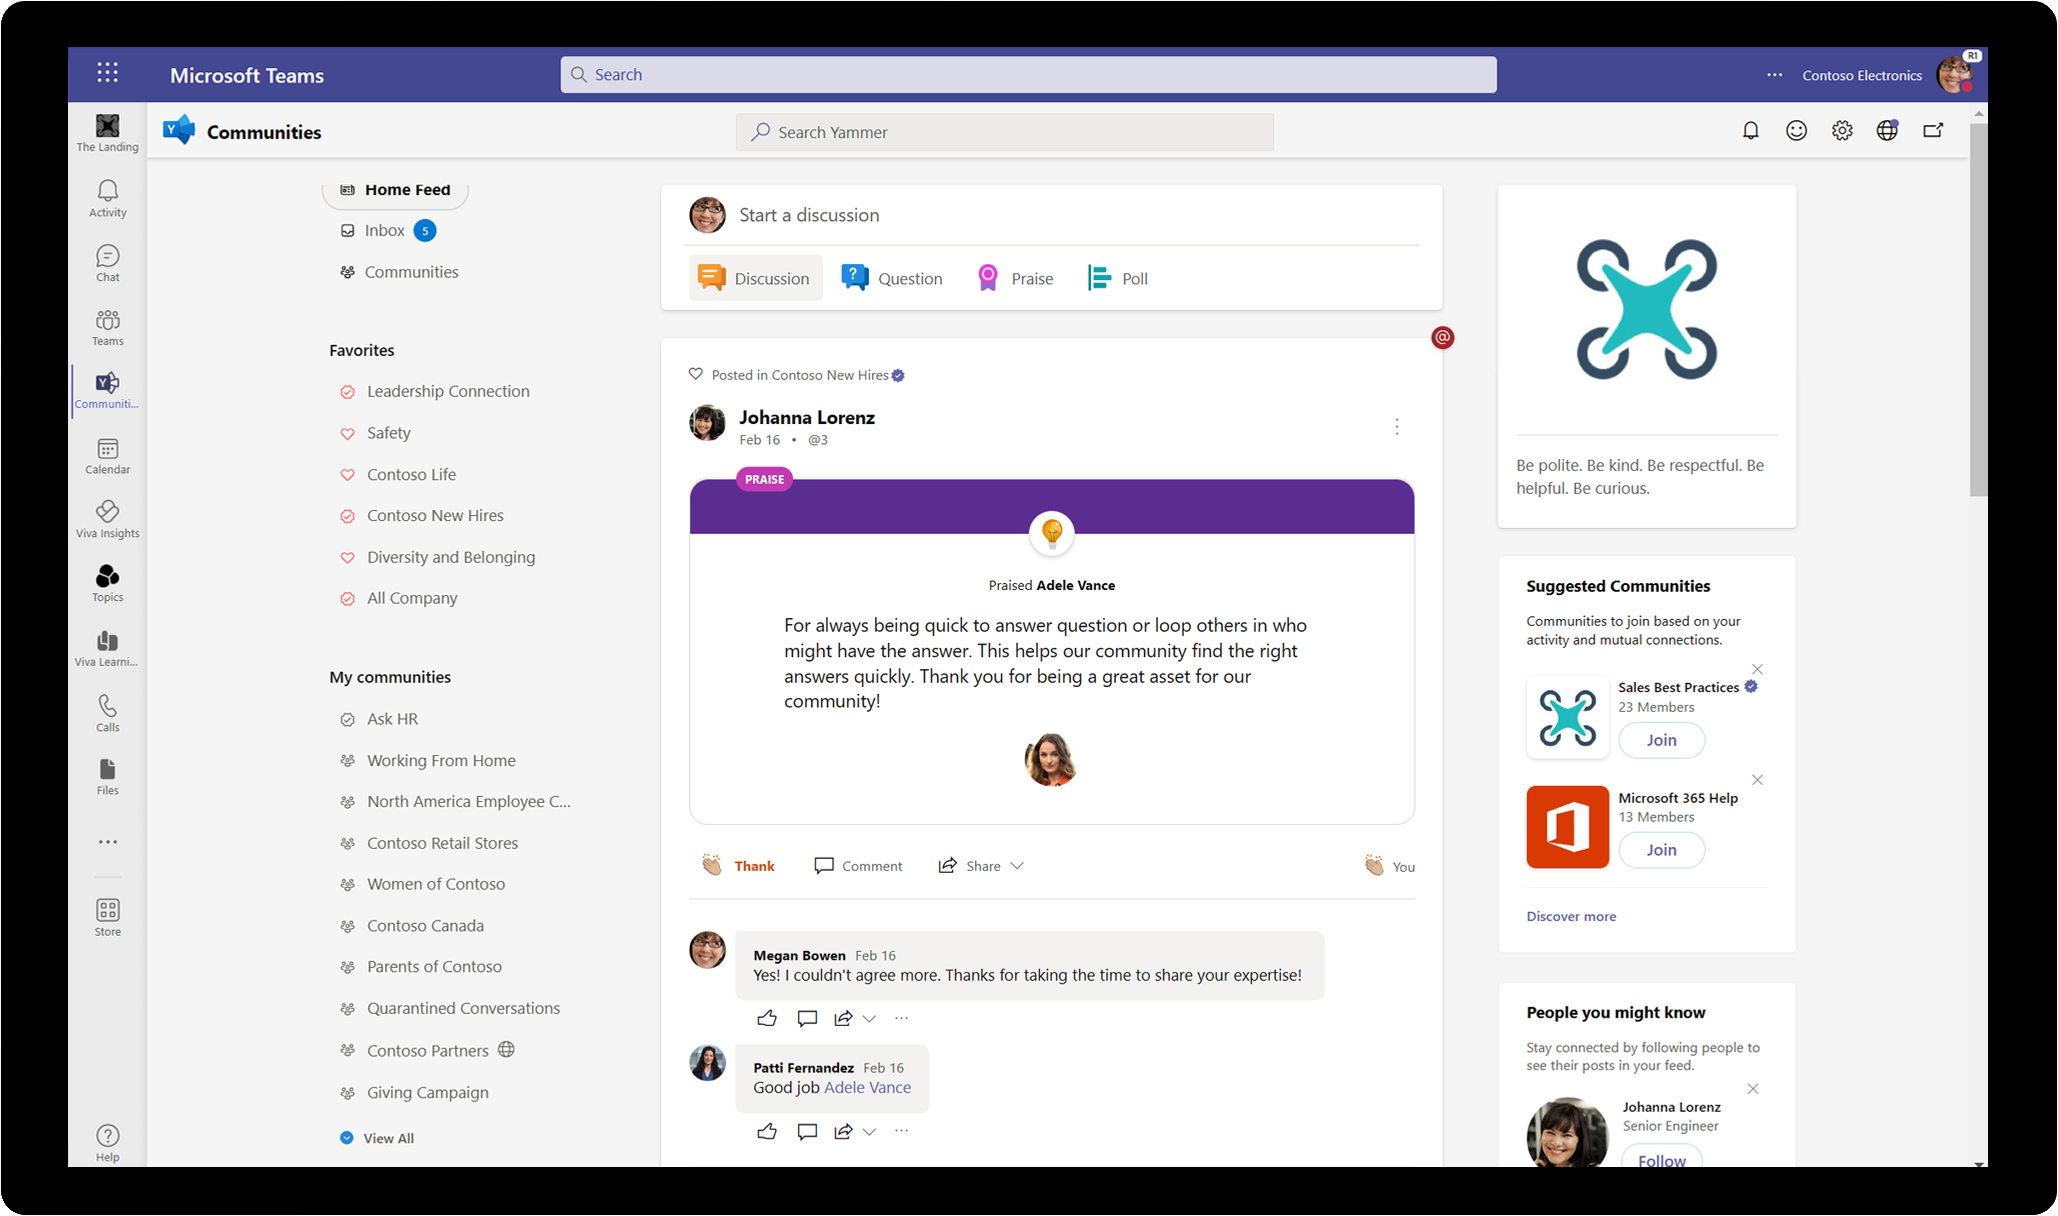 See suggested communities on the right sidebar of Yammer.